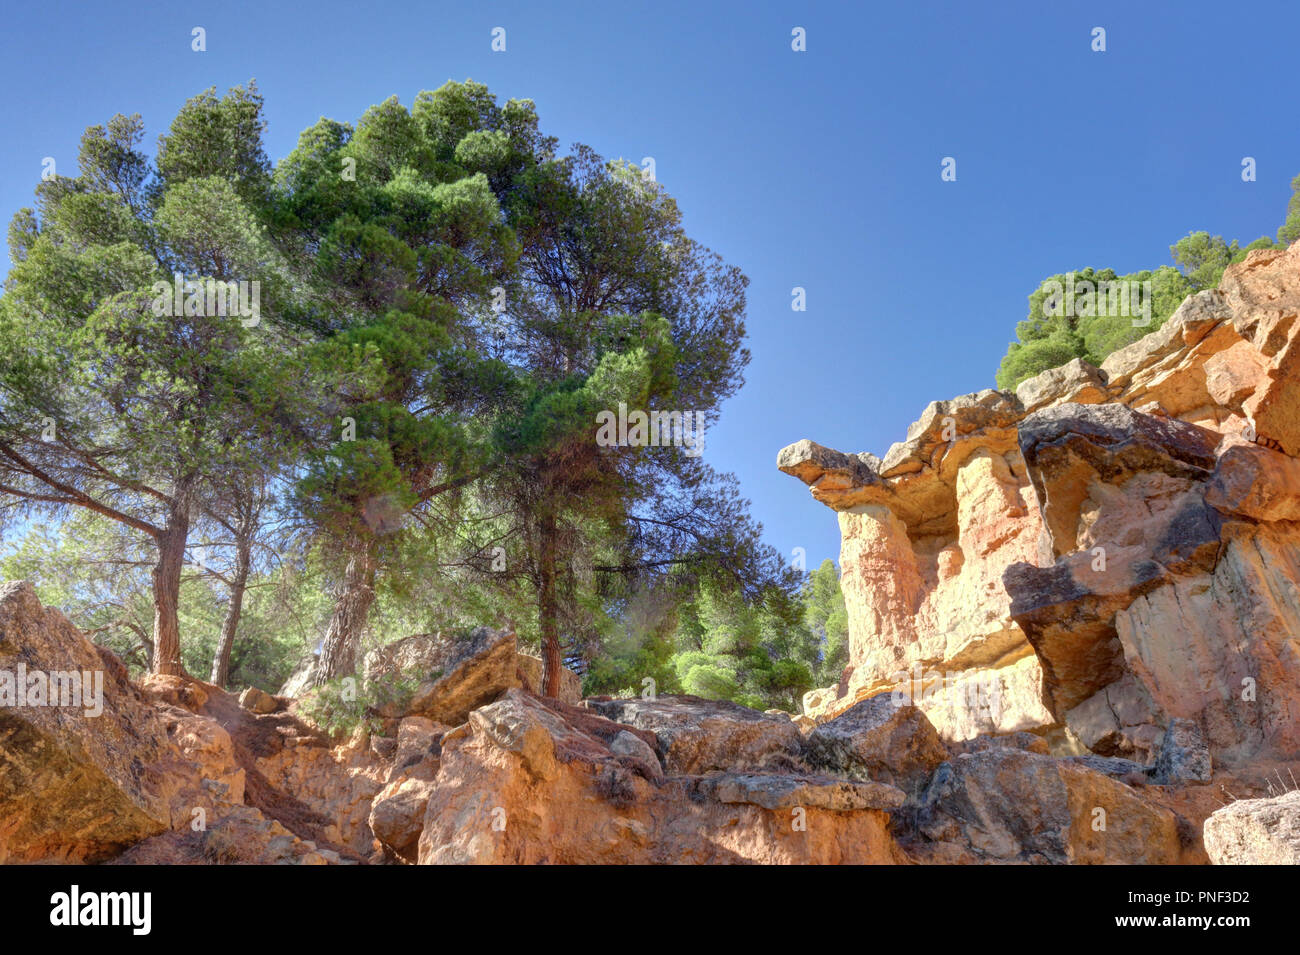 A protruding red rock with trees and a deep blue sky in the canyon style hills of Anento, a small town in Aragon, Spain Stock Photo